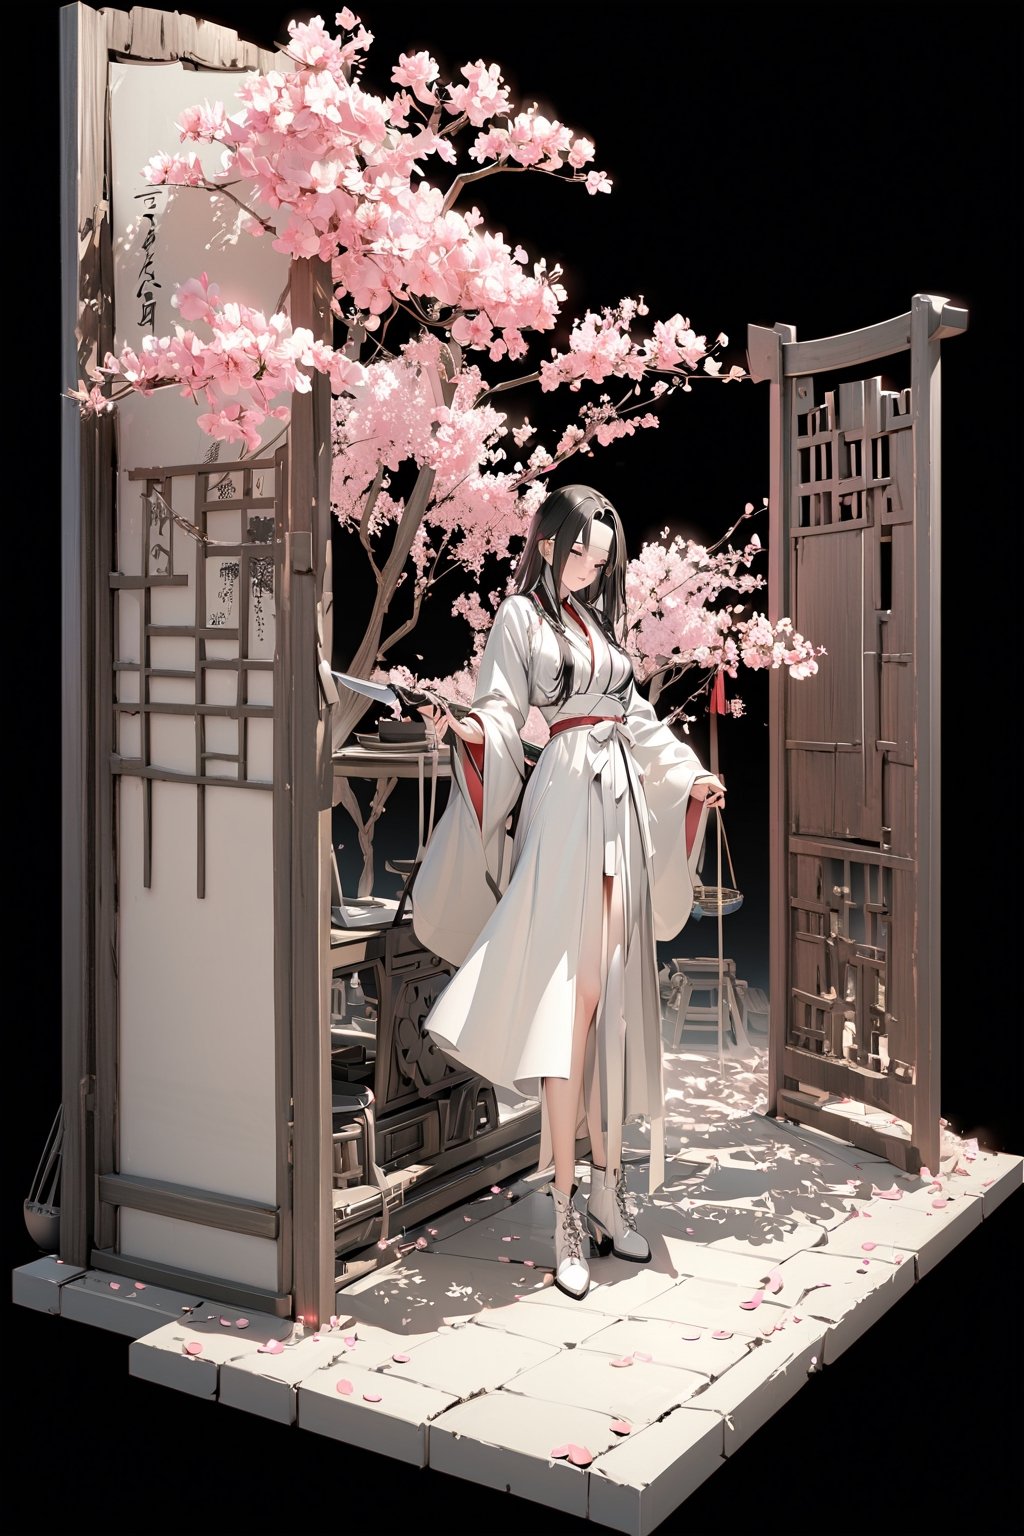 8k, high quality, masterpiece: 1.3), miniature model, white background, 3D isometric style, center, solo, full body,

1 Chinese woman, 26 years old, long black hair, with pink petals on her forehead, wearing a red and white Chinese robe, white plush at the neckline, wearing white leather boots, holding an iron-gray ancient long-handled weapon connecting two sharp knives, and the background is the gate of the ancient Chinese camp.